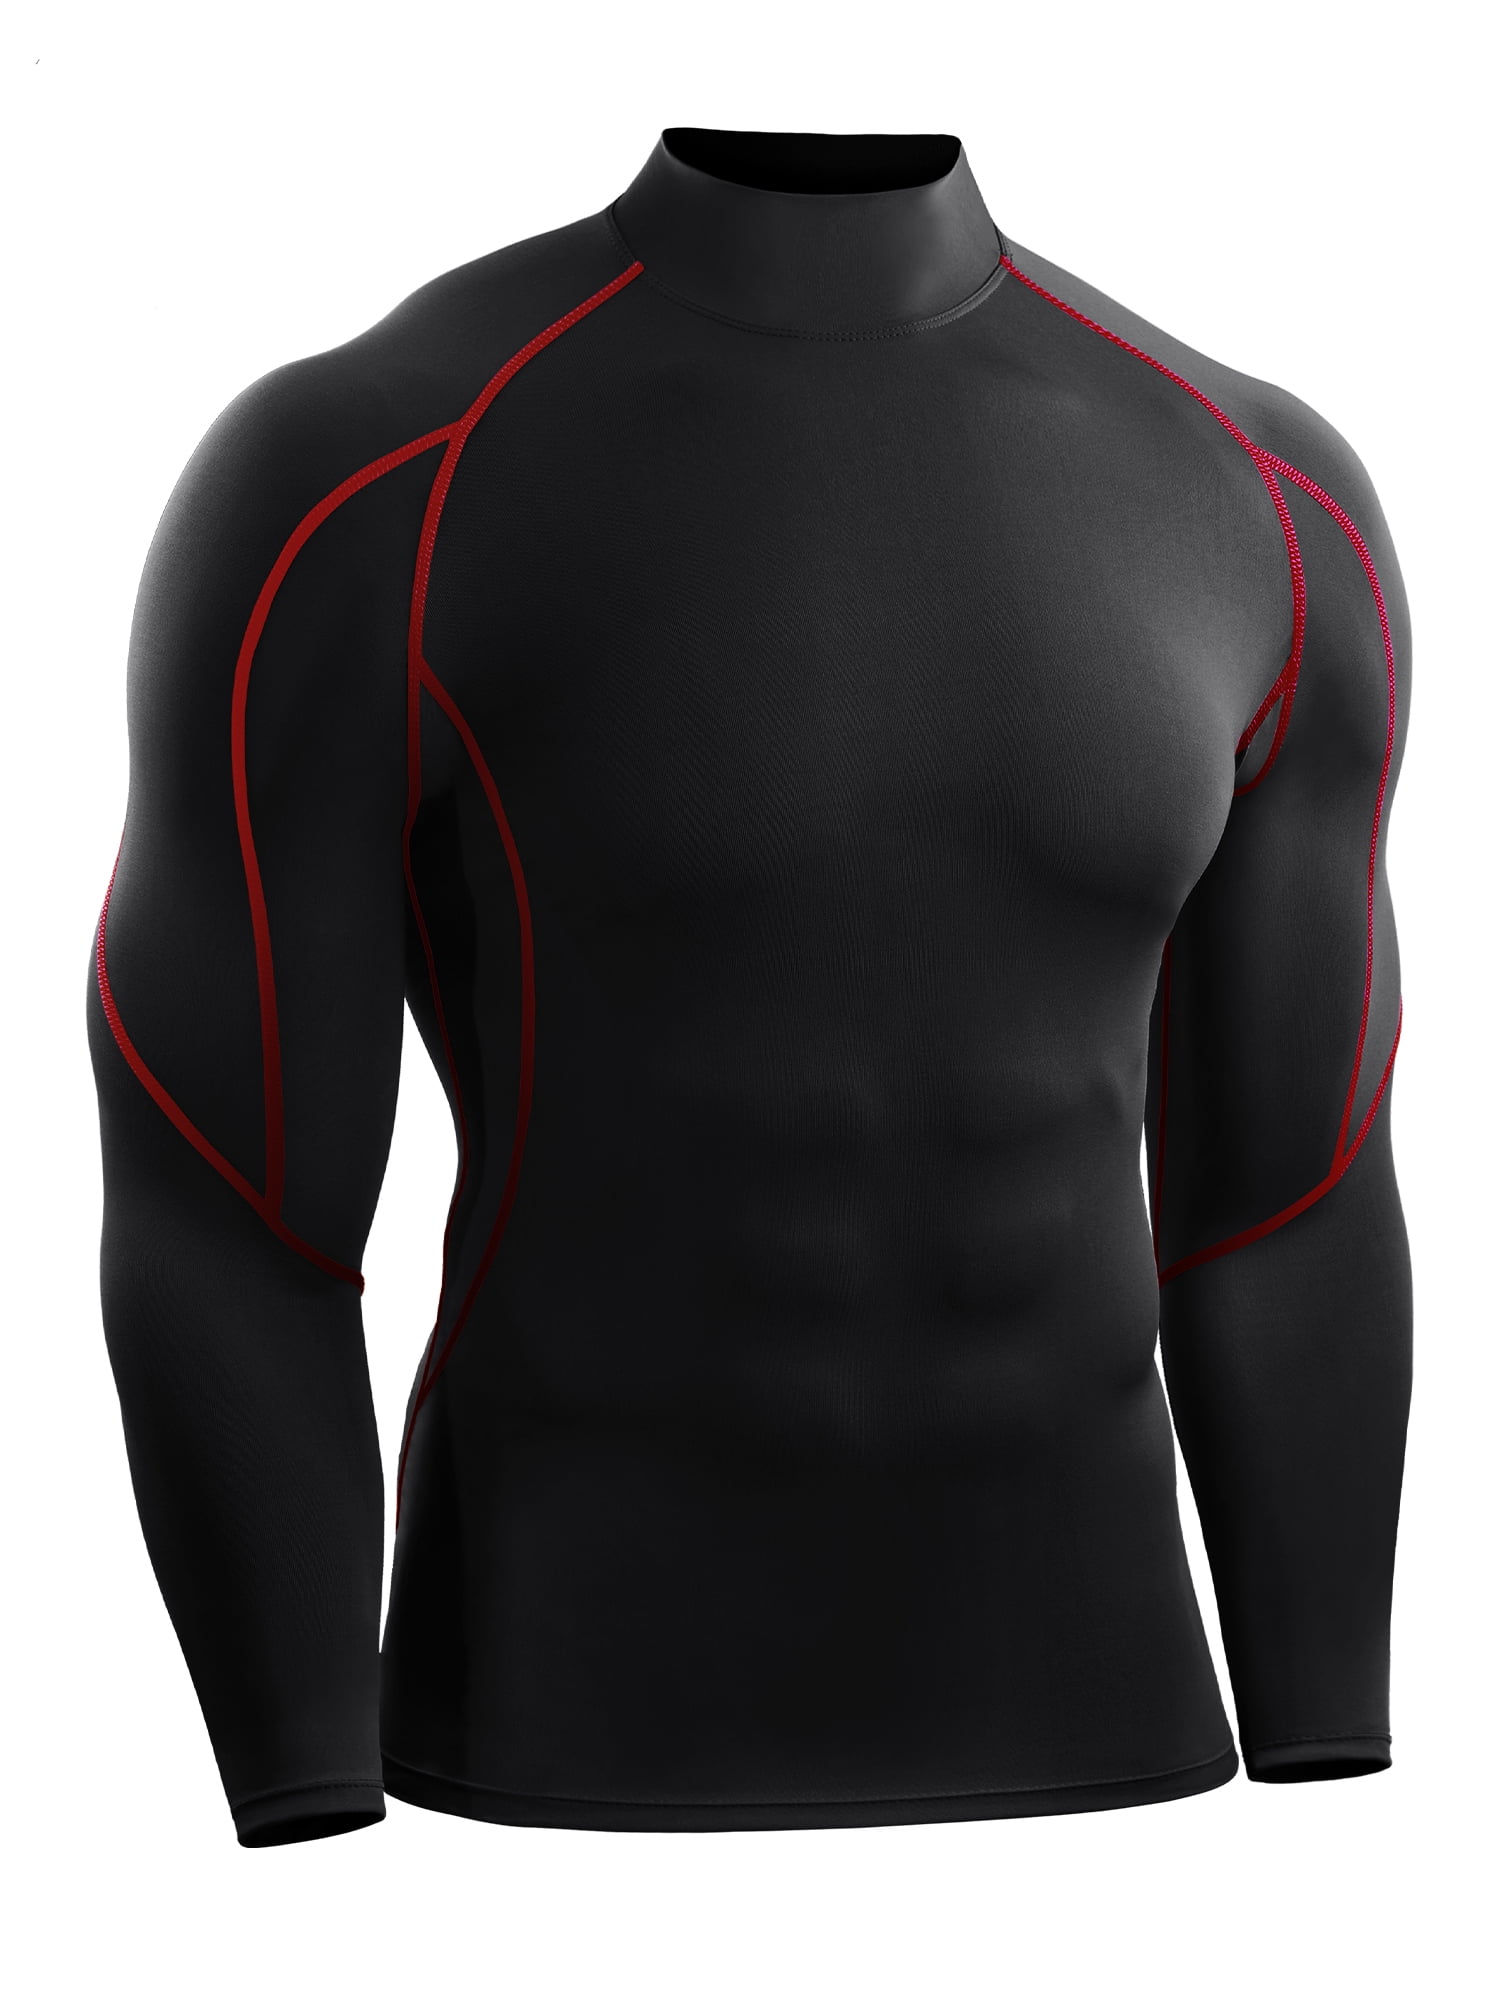 MENS UNDER ARMOUR TEAMSPORTS BASE LAYER TOP 